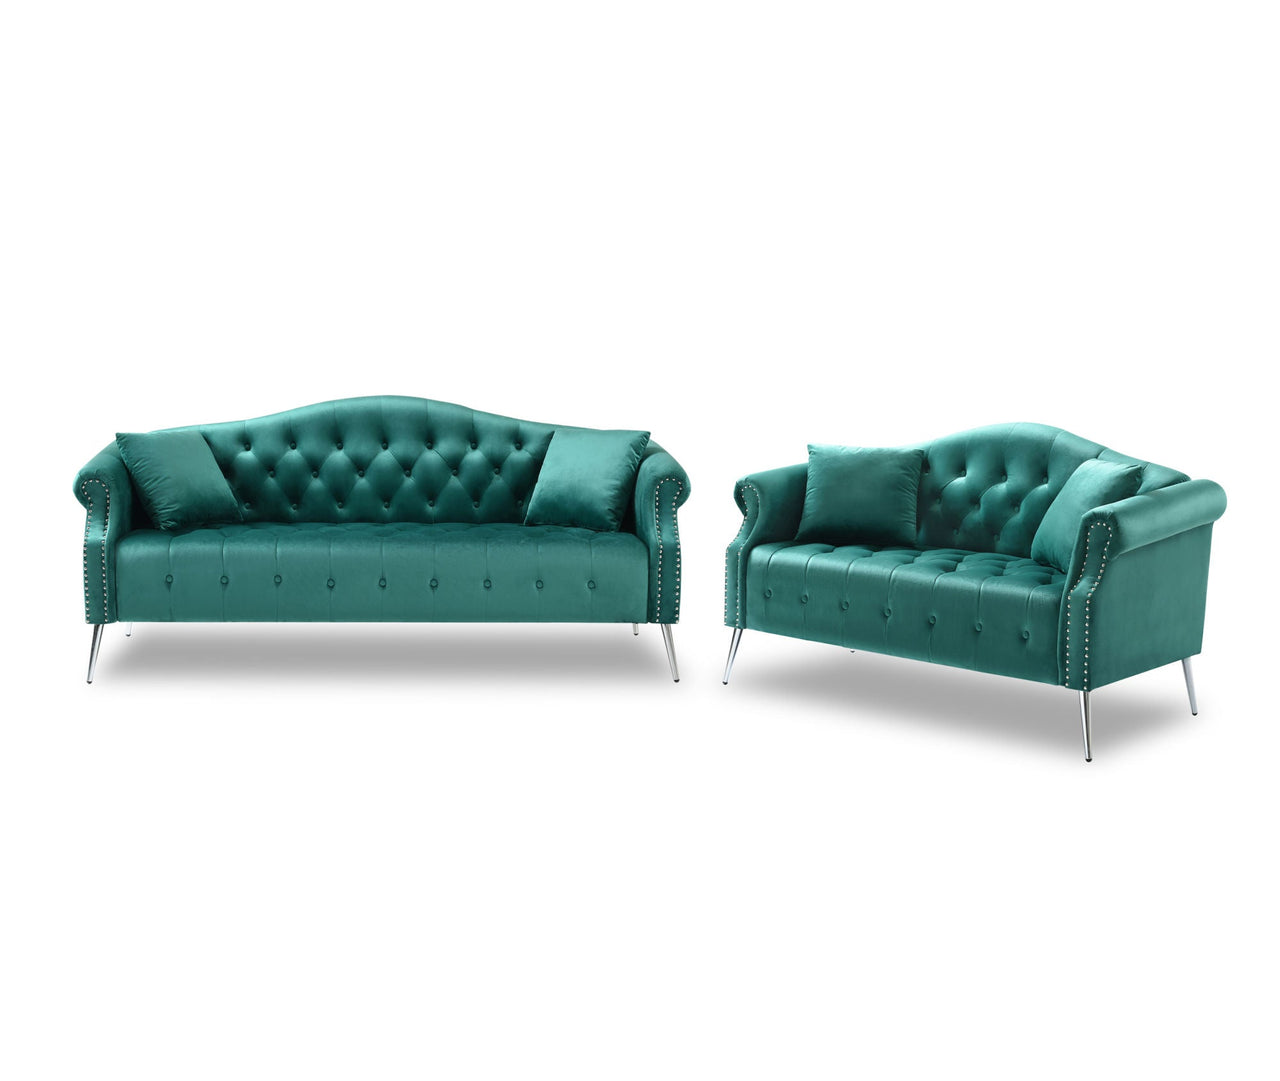 Classic Chesterfield Velvet Sofa Loveseat Contemporary Upholstered Couch Button Tufted Nailhead Trimming Curved Backrest Rolled Arms with Silver Metal Legs Living Room Set; 4 Pillows Included; Green - Casatrail.com